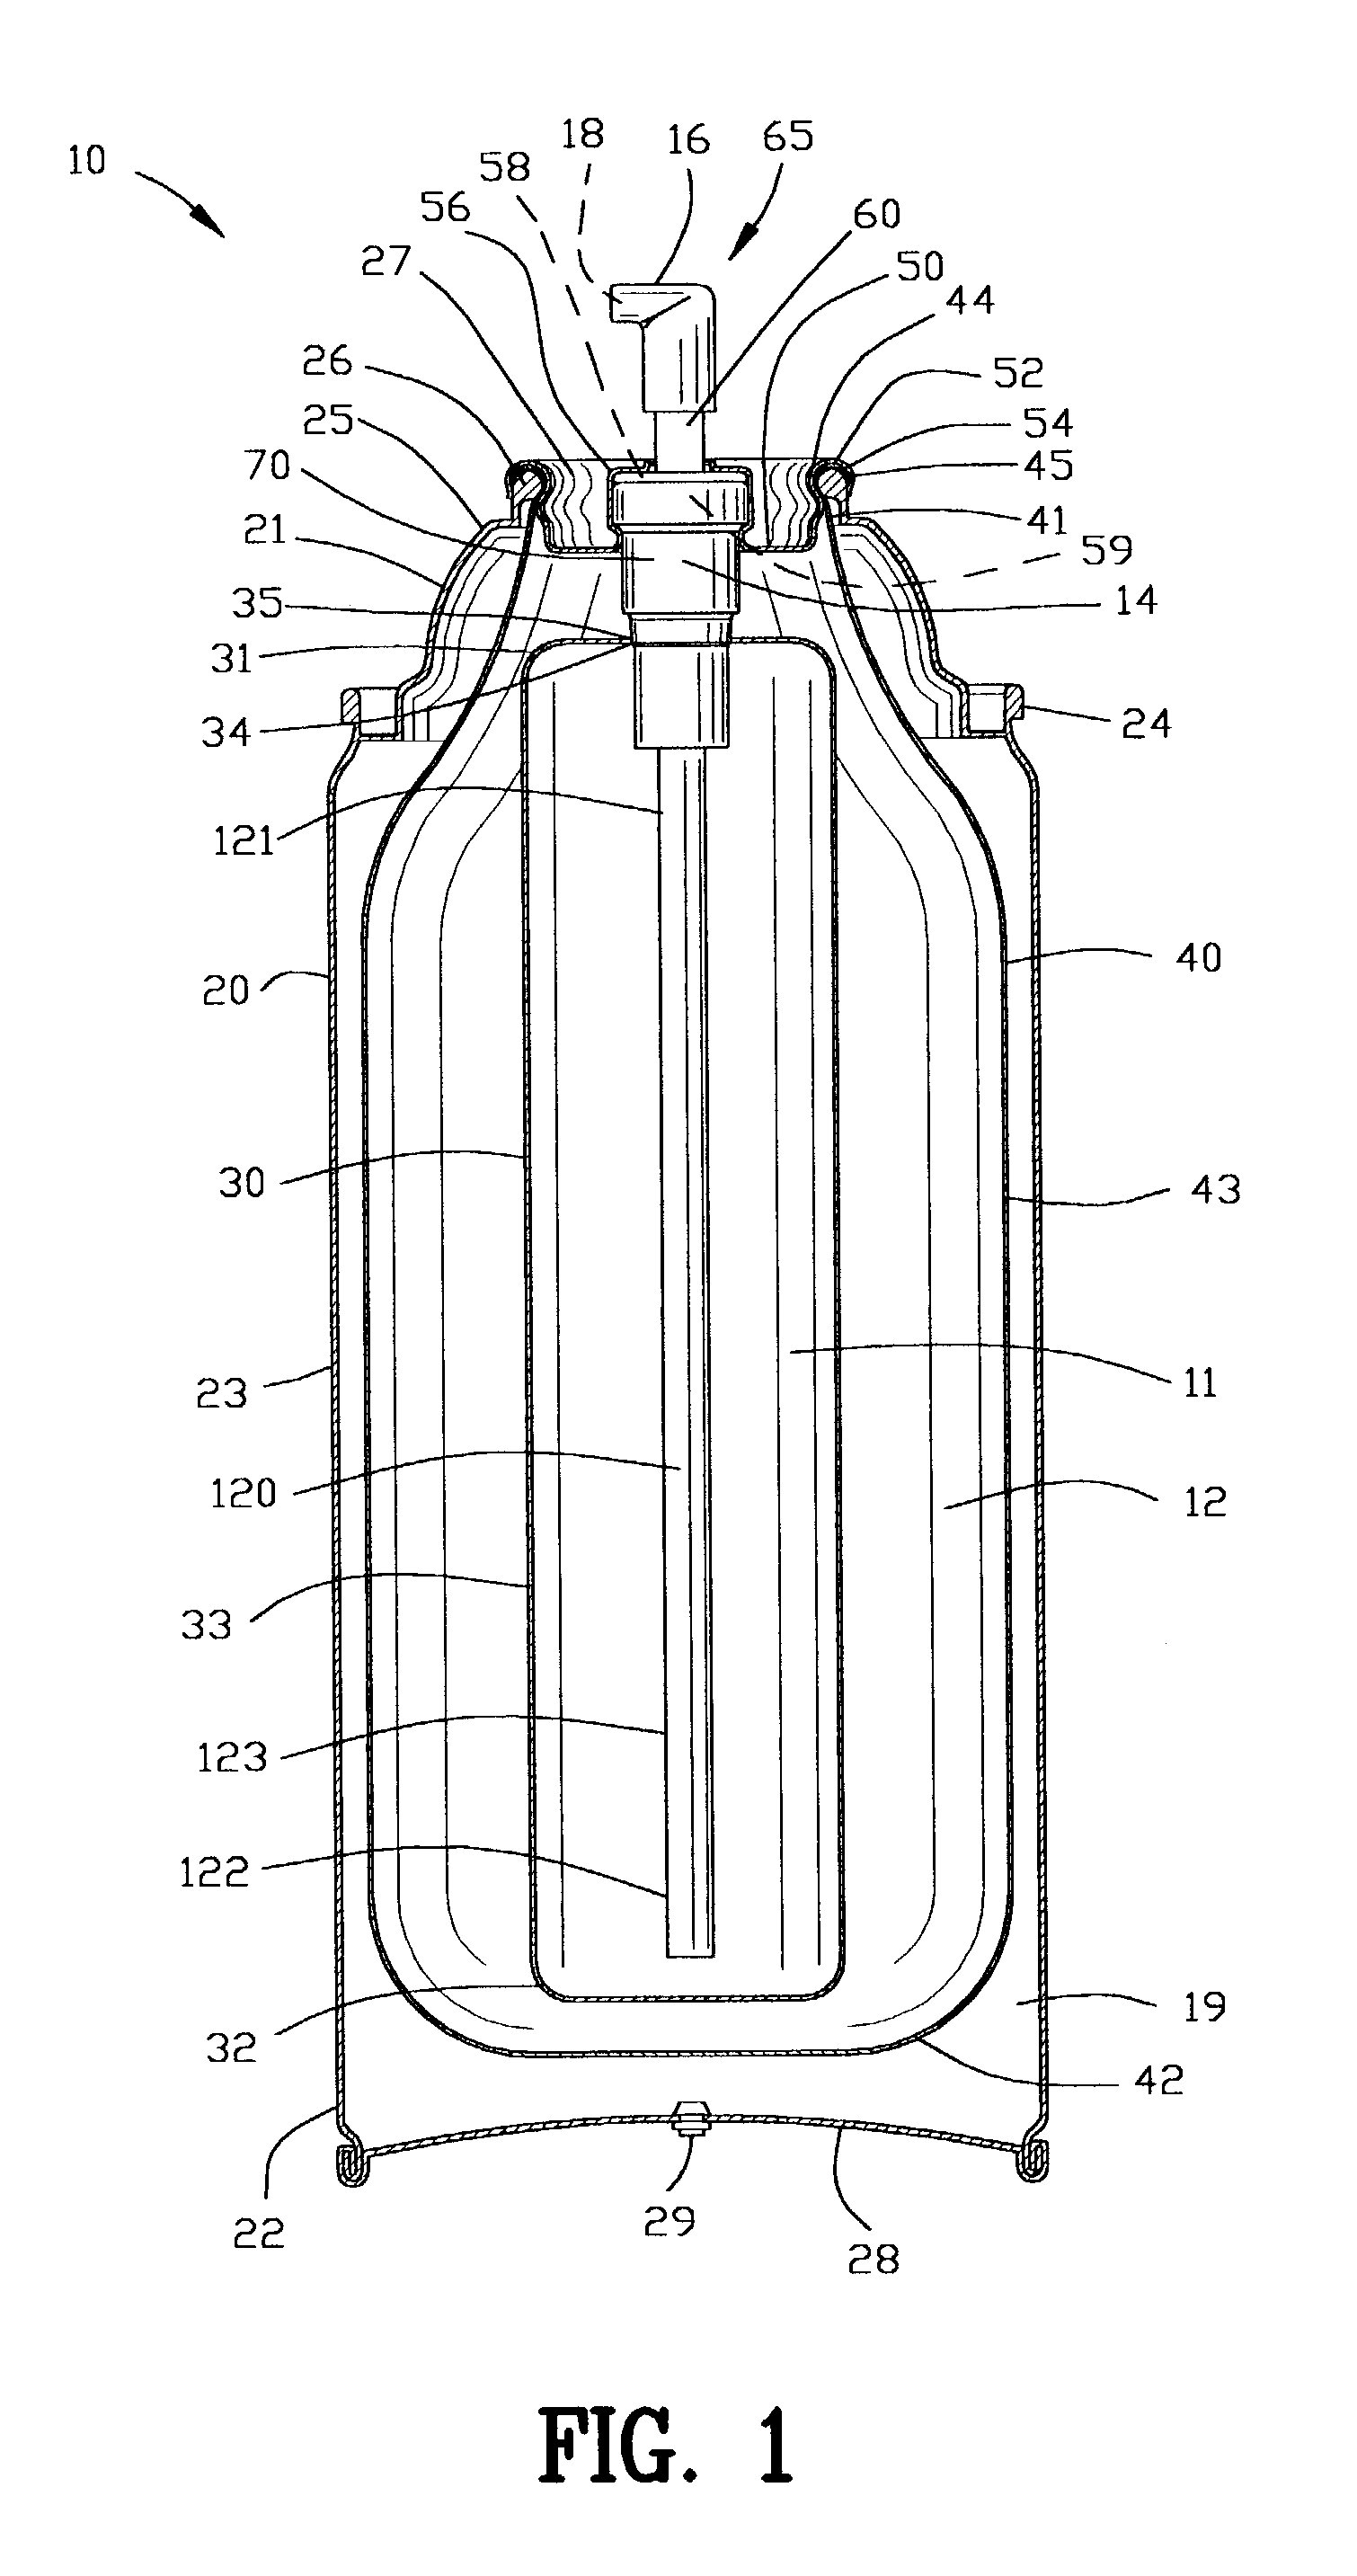 Aerosol dispenser for mixing and dispensing multiple fluid products